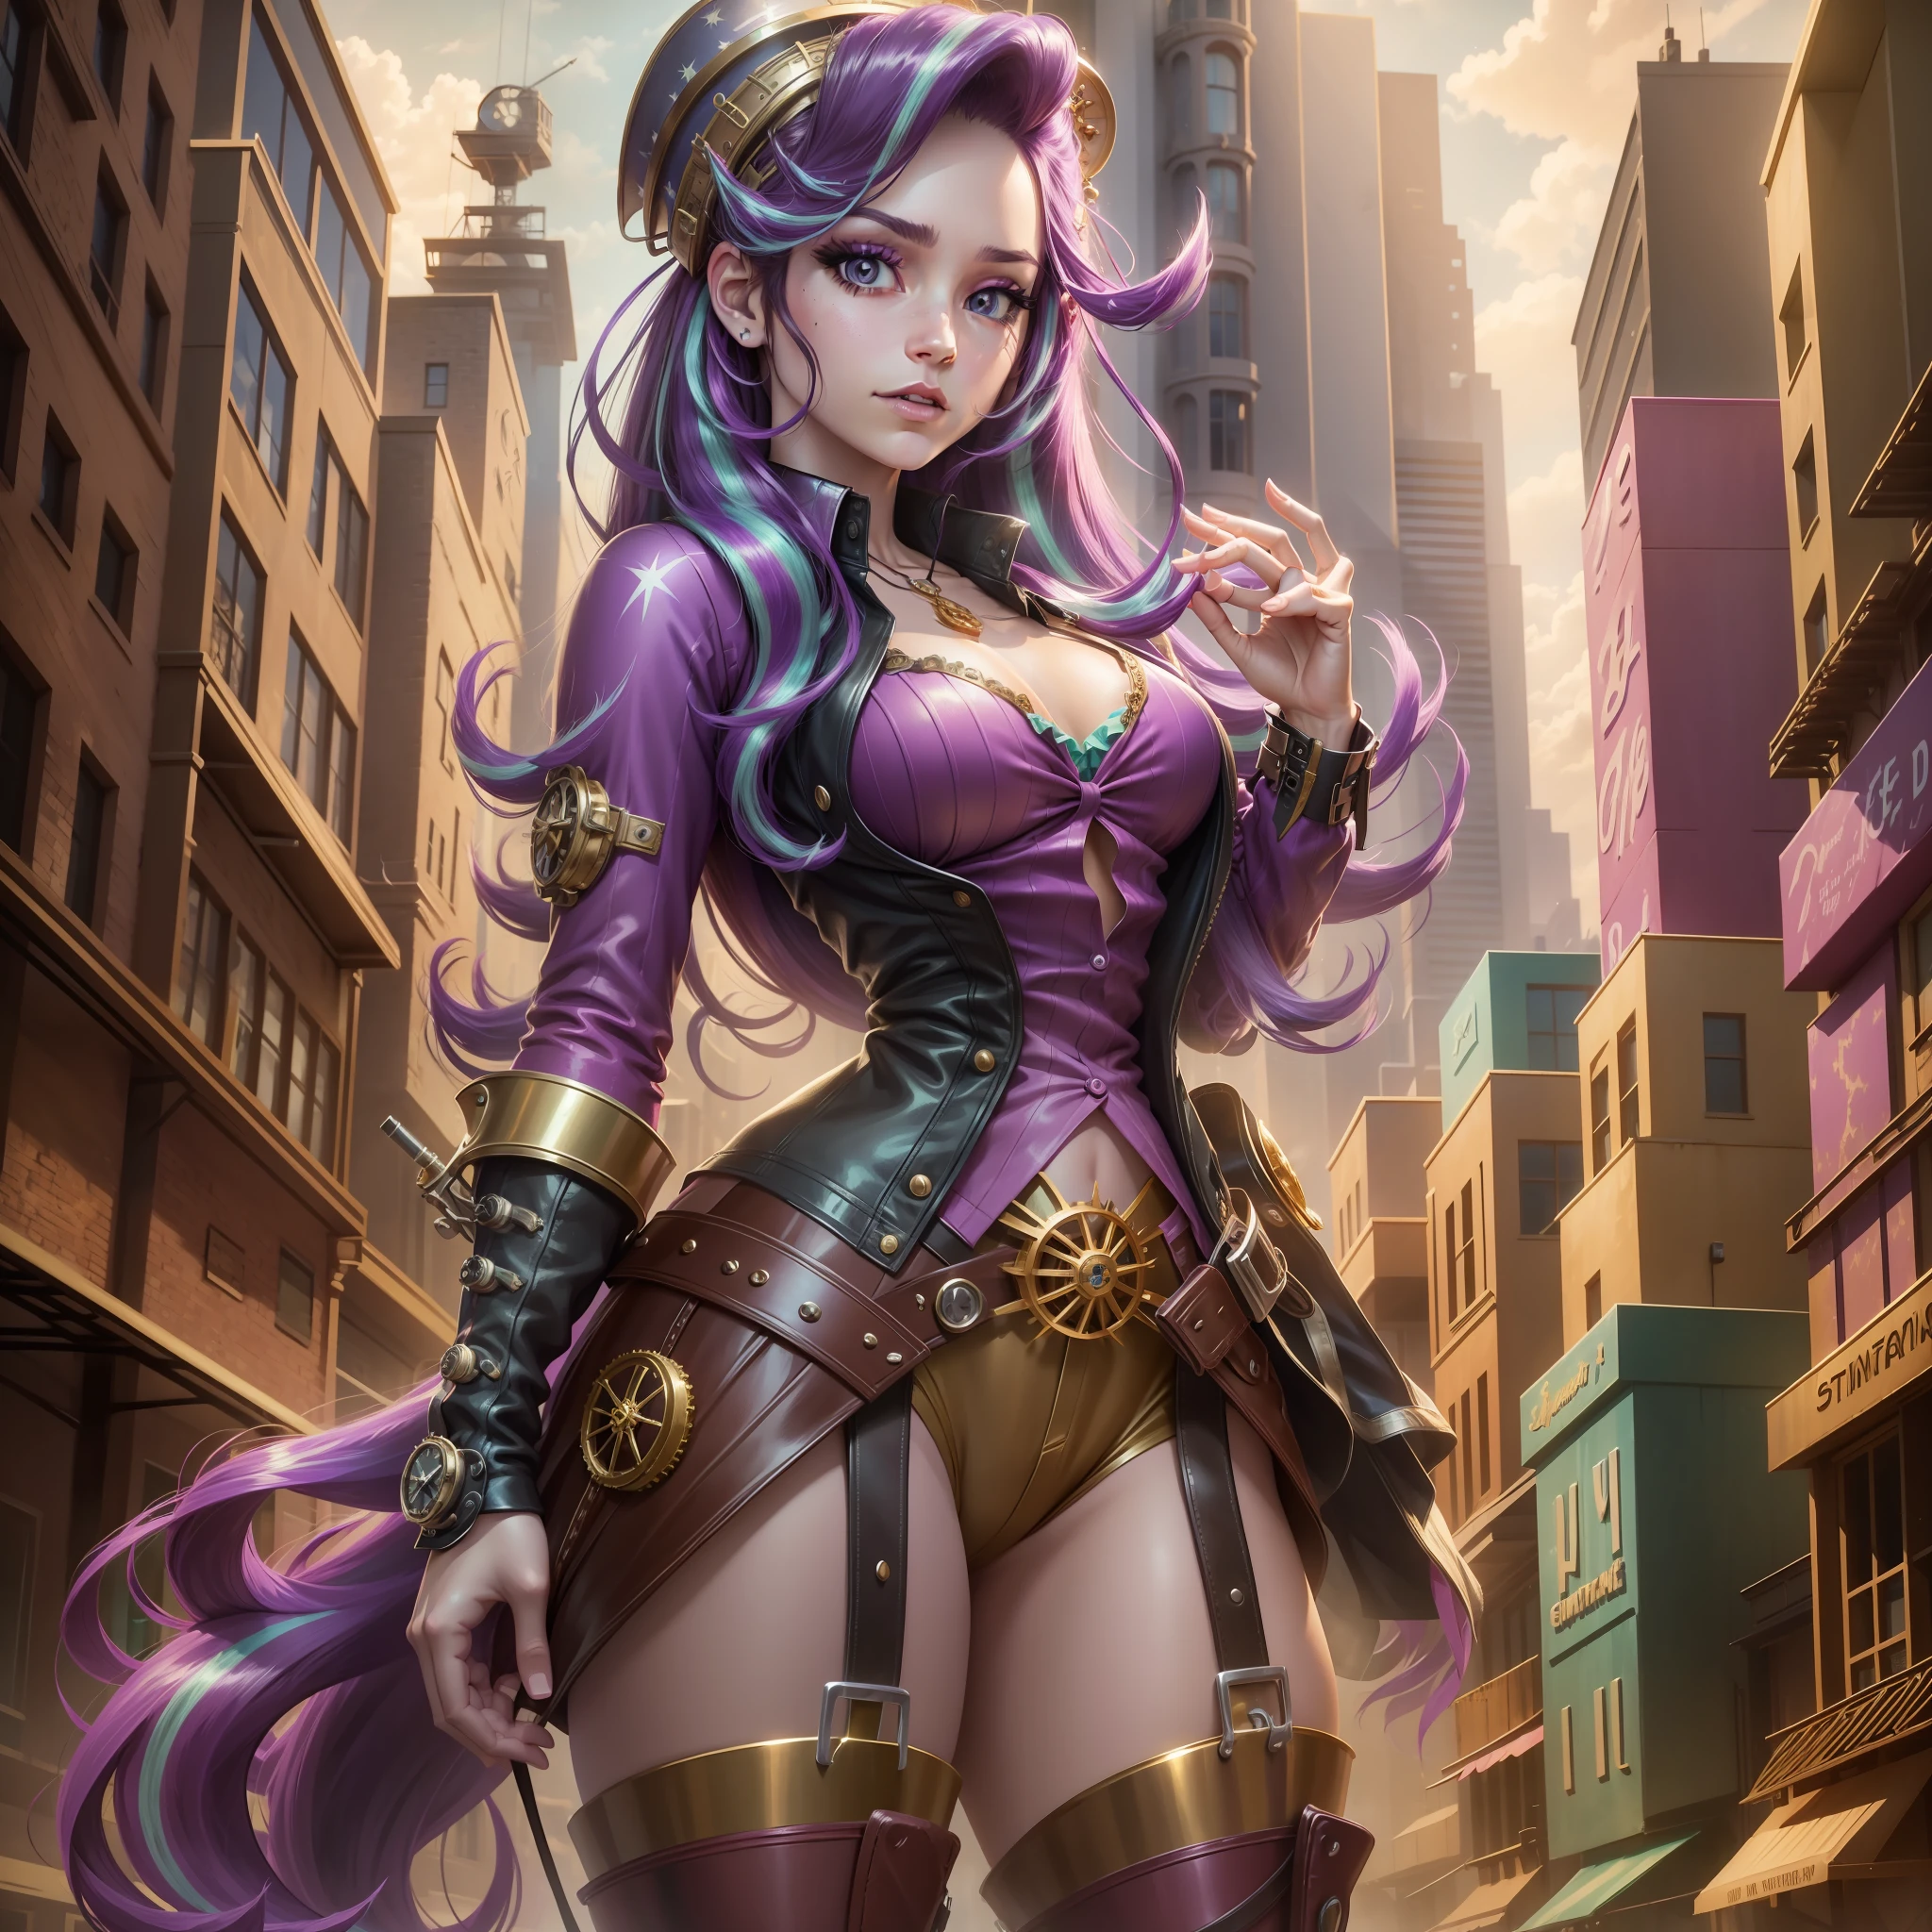 Starlight Glimmer, Starlight Glimmer from My Little Pony, Starlight Glimmer in the form of a girl, long hair, lush hair, Steampunk, body from steampunk mechanisms, golden gears, not human, gear skin, steampunk style, best quality, very detailed, ultra 8k resolution